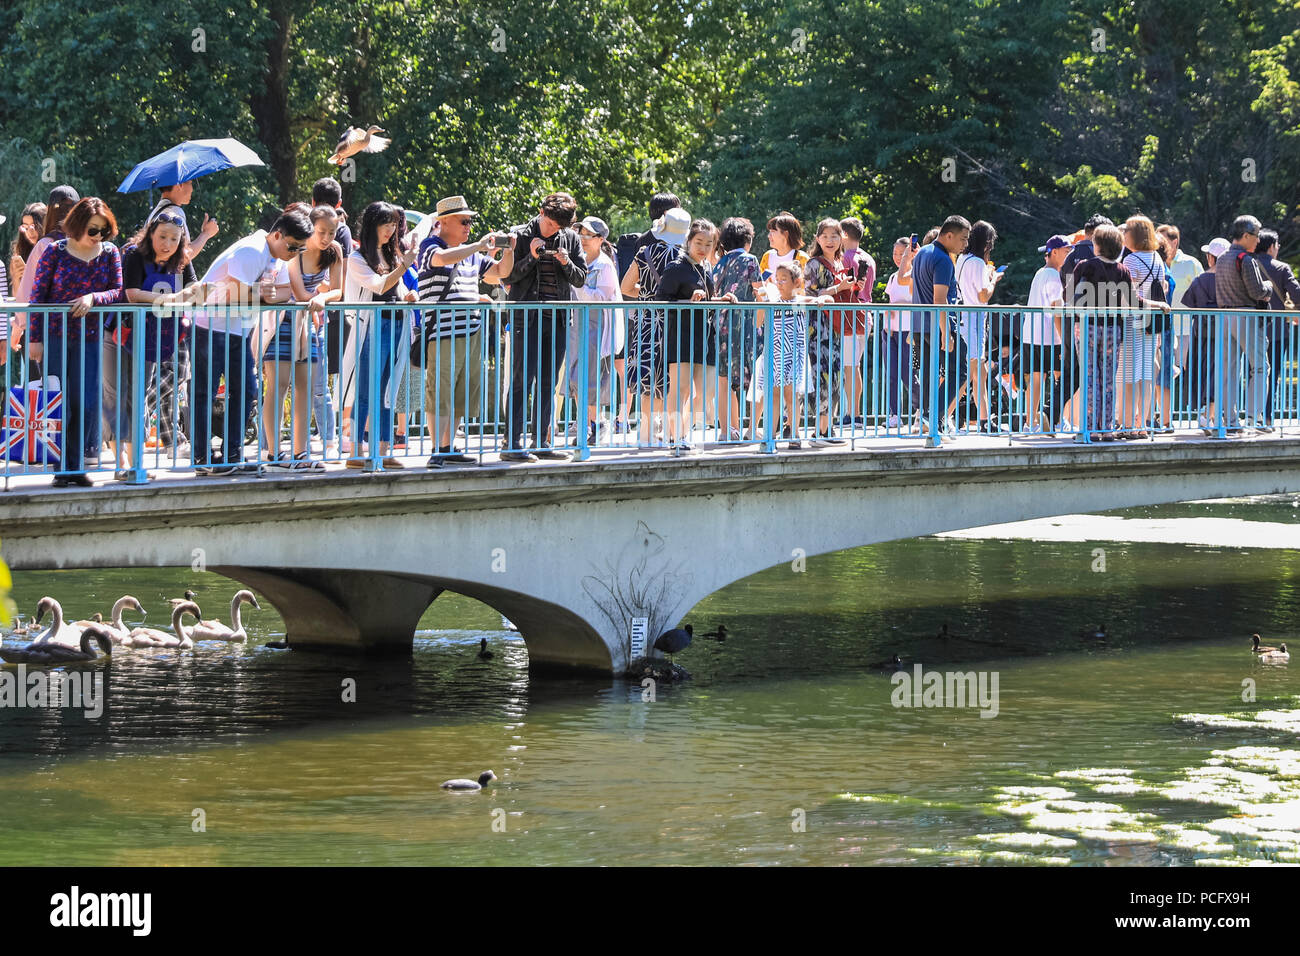 St James's Park, London, UK, 2nd August 2018. Tourists crowd onto the Blue Bridge, a footbridge across the lake. Tourists and wildlife seek respite from the hot London temperatures near the lake in St James's Park. Credit: Imageplotter News and Sports/Alamy Live News Stock Photo